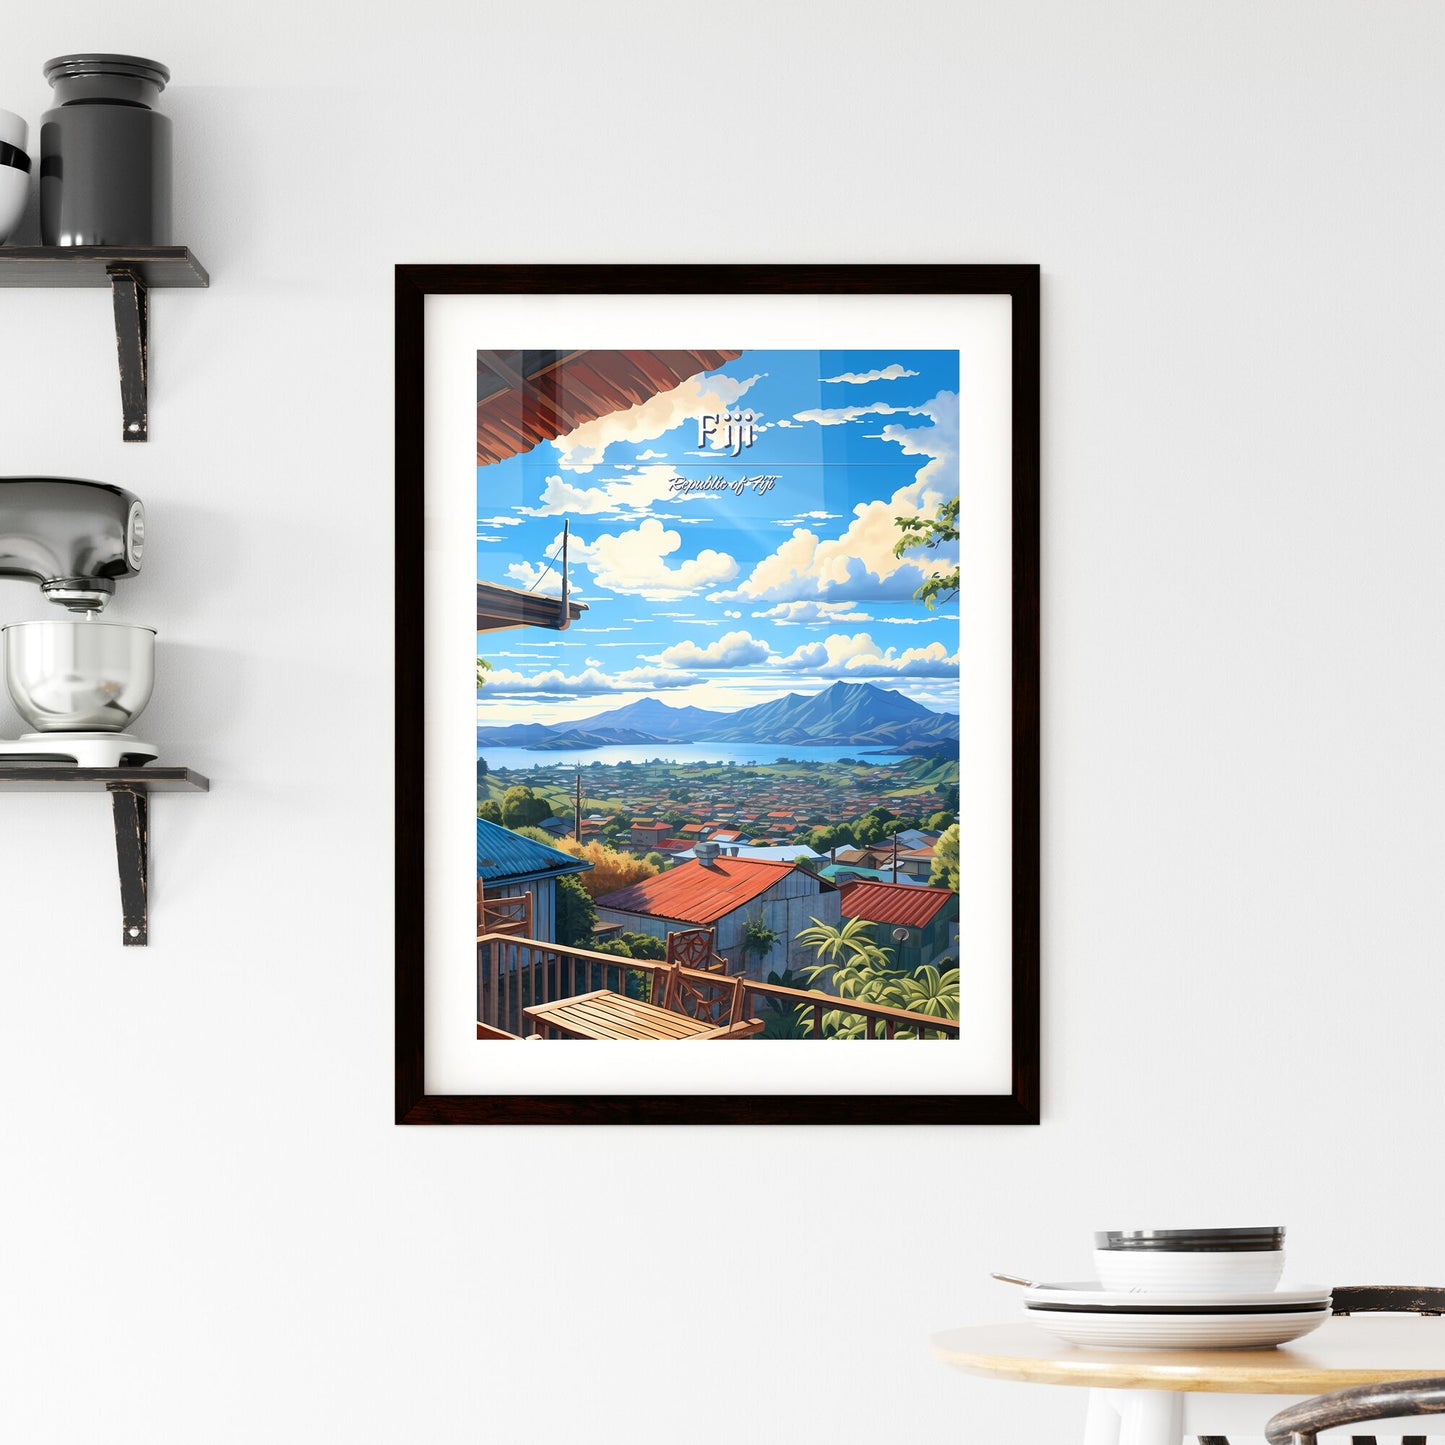 On the roofs of Fiji, Republic of Fiji - Art print of a view of a town from a balcony Default Title